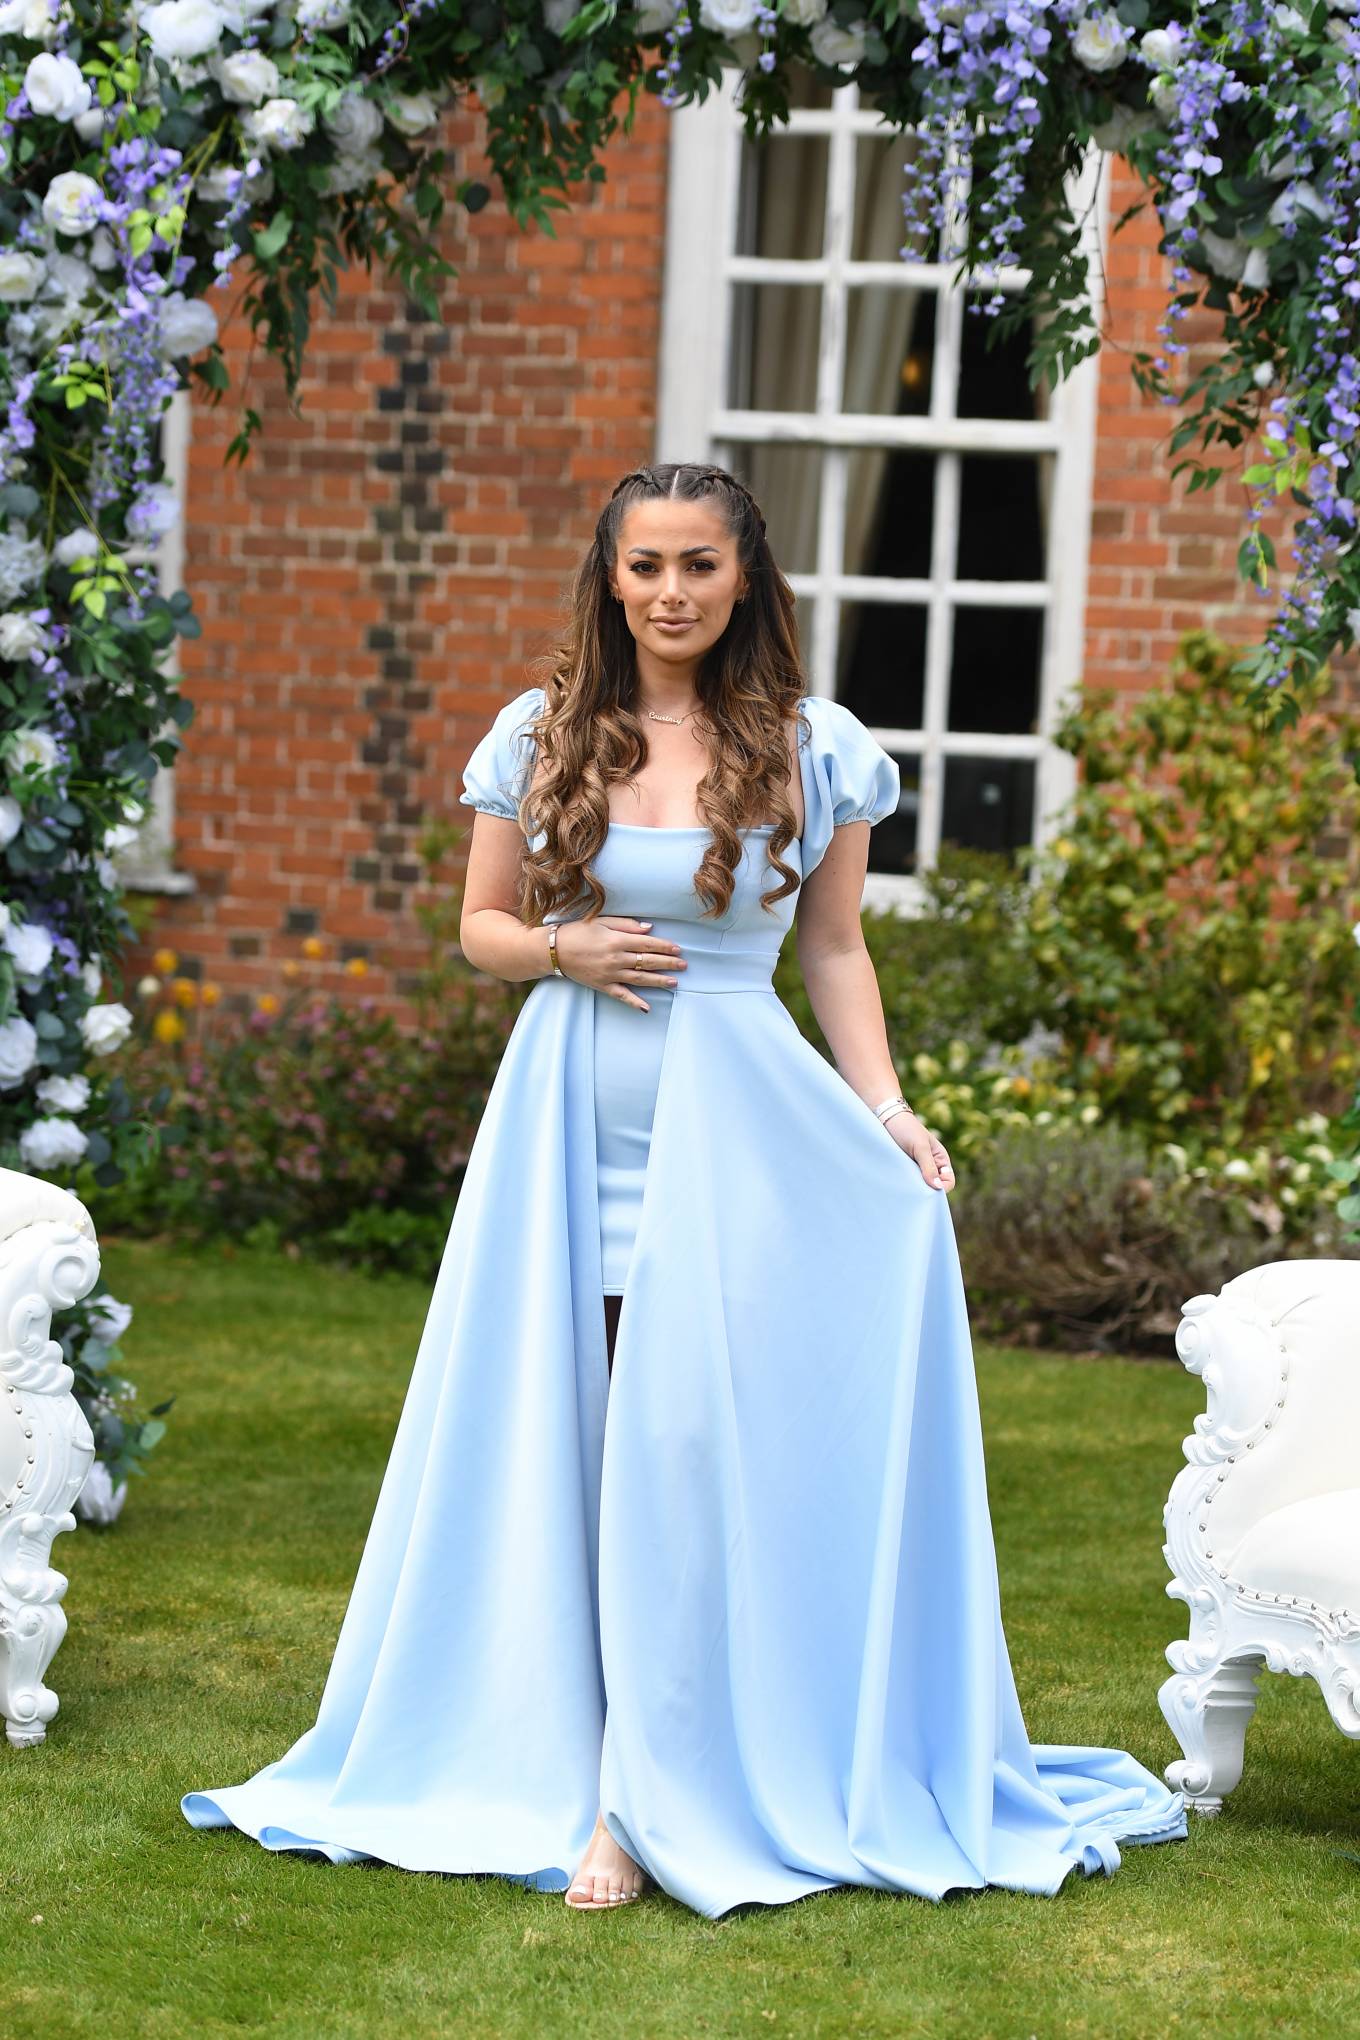 Courtney Green 2021 : Courtney Green – The Only Way is Essex TV Show filming – Bridgerton Special in Essex-02